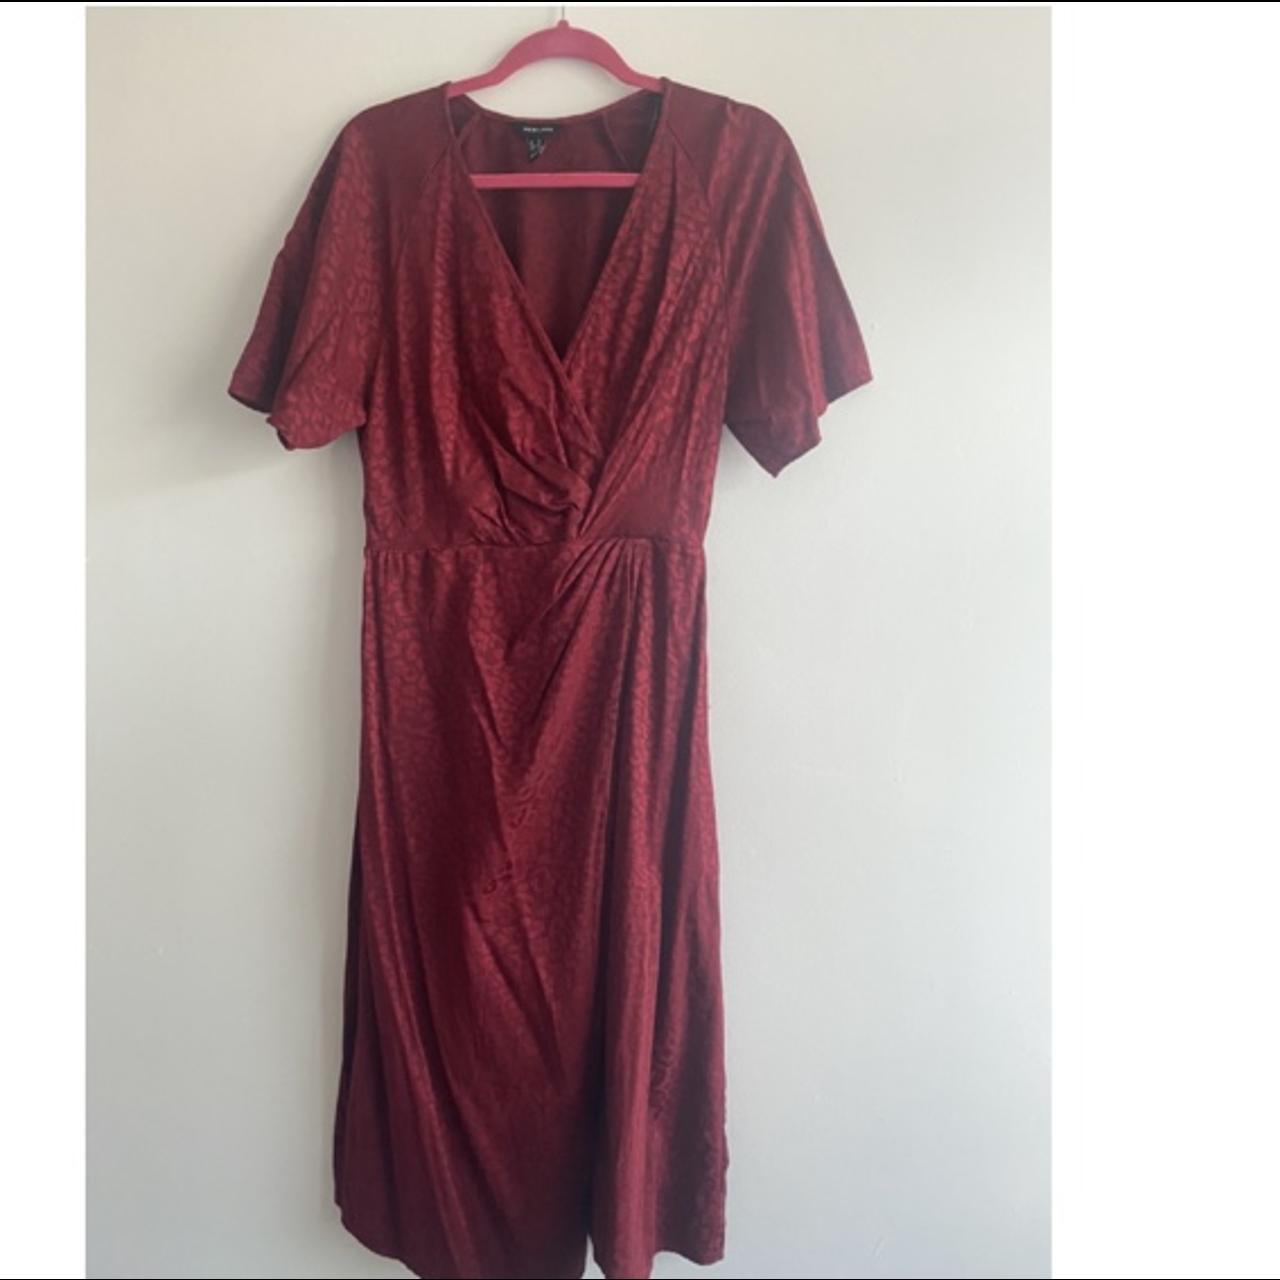 New Look Women's Red and Burgundy Dress | Depop